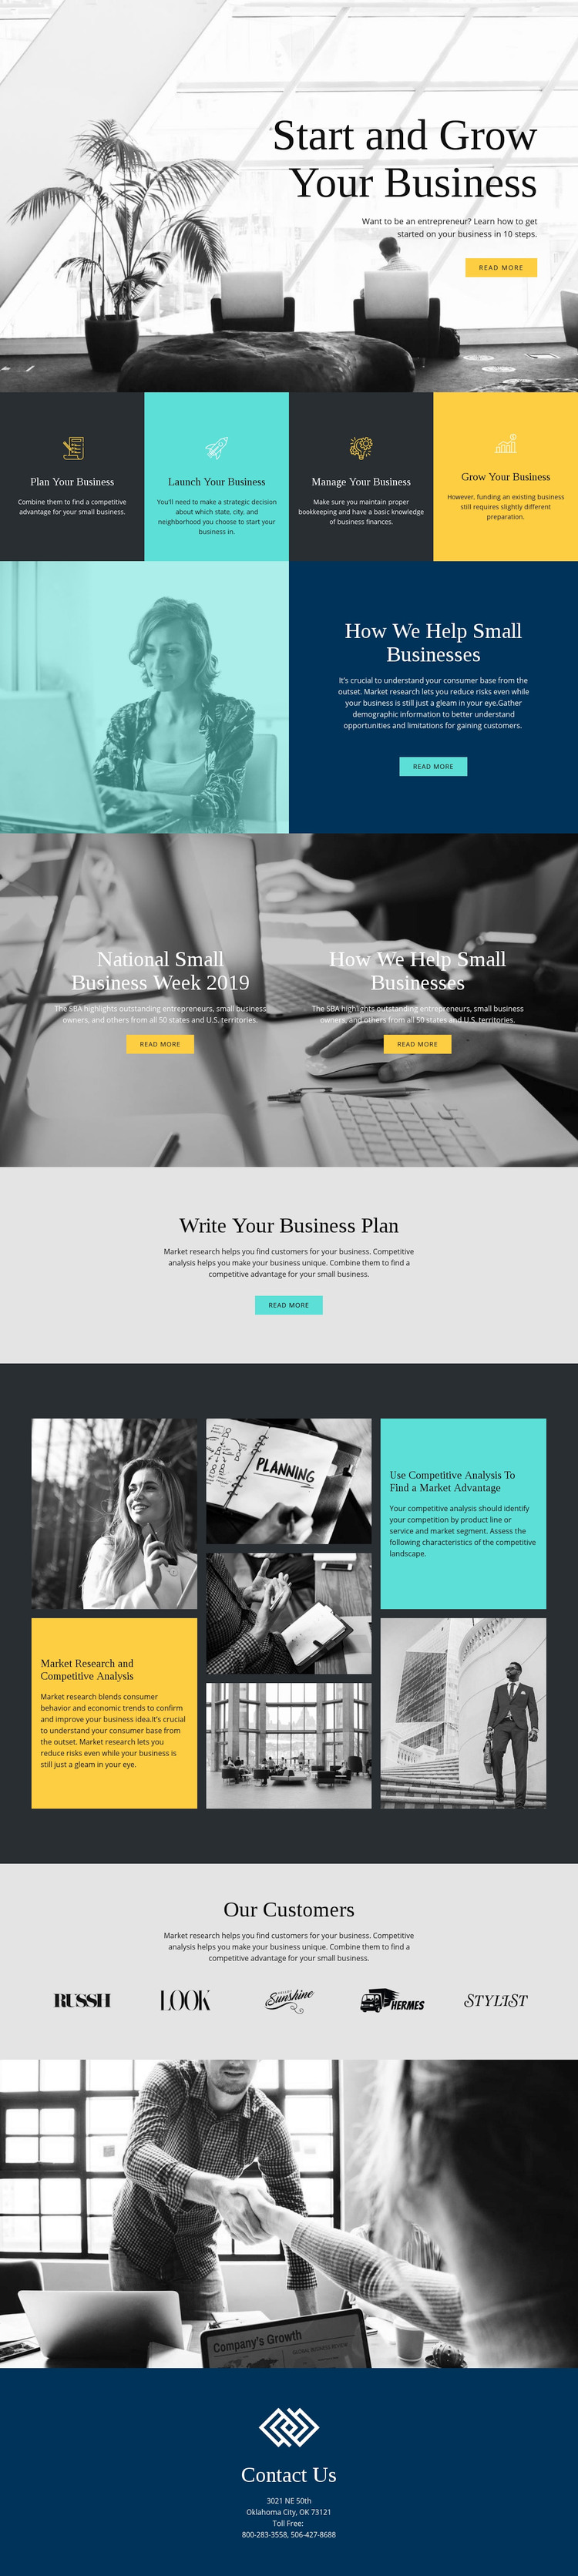 Start and grow your business Elementor Template Alternative